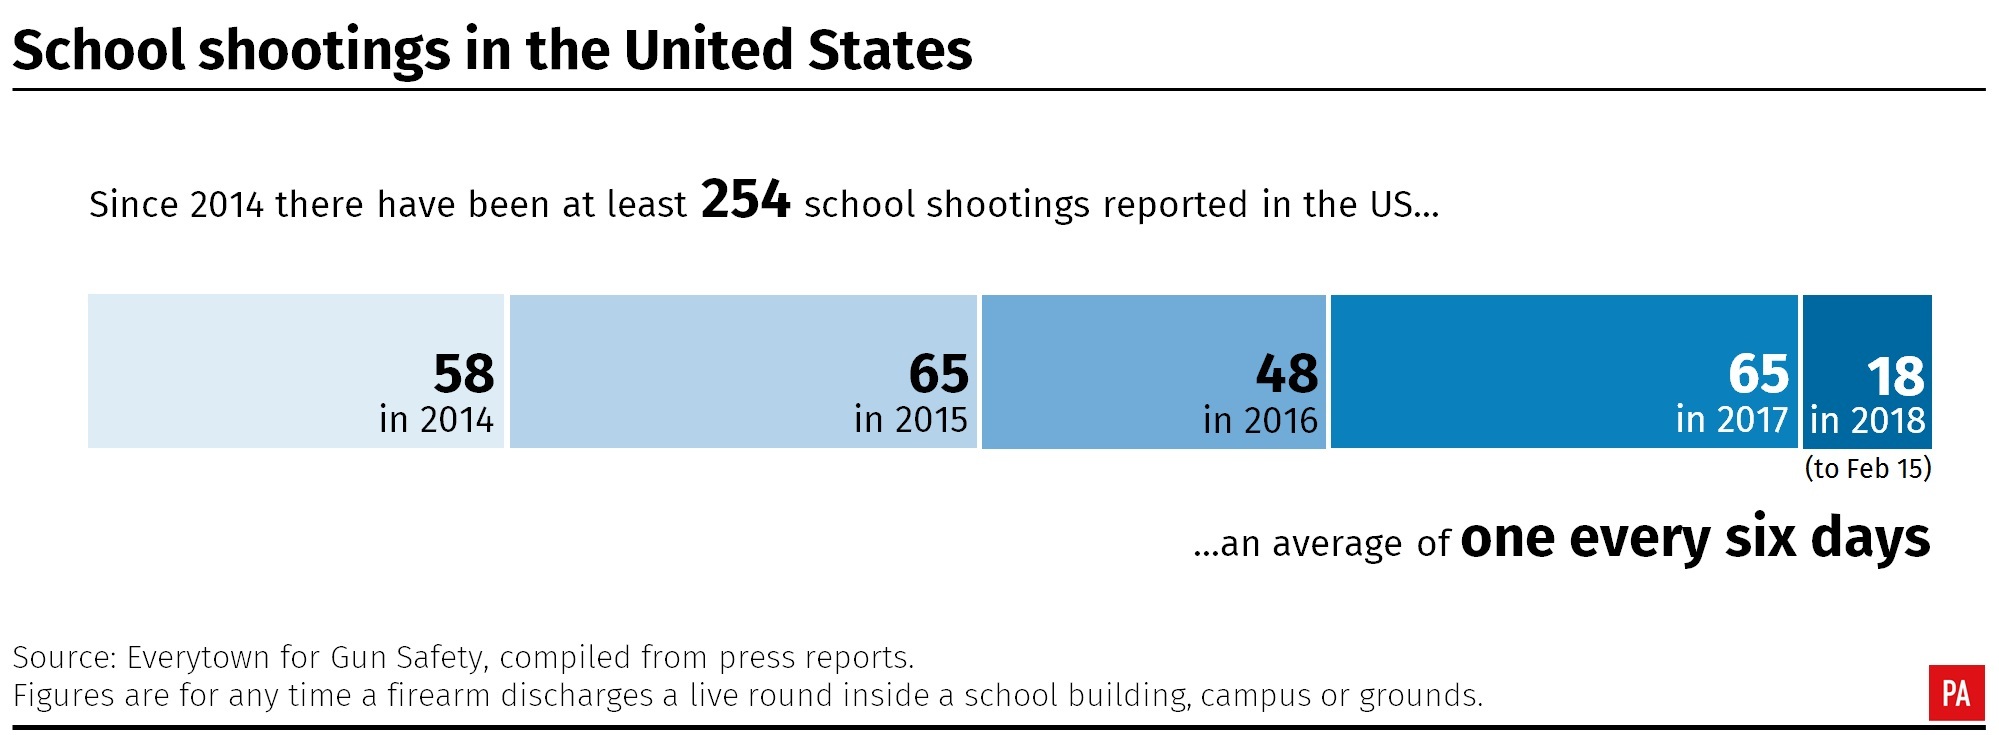 School shootings in the United States, 2014-date